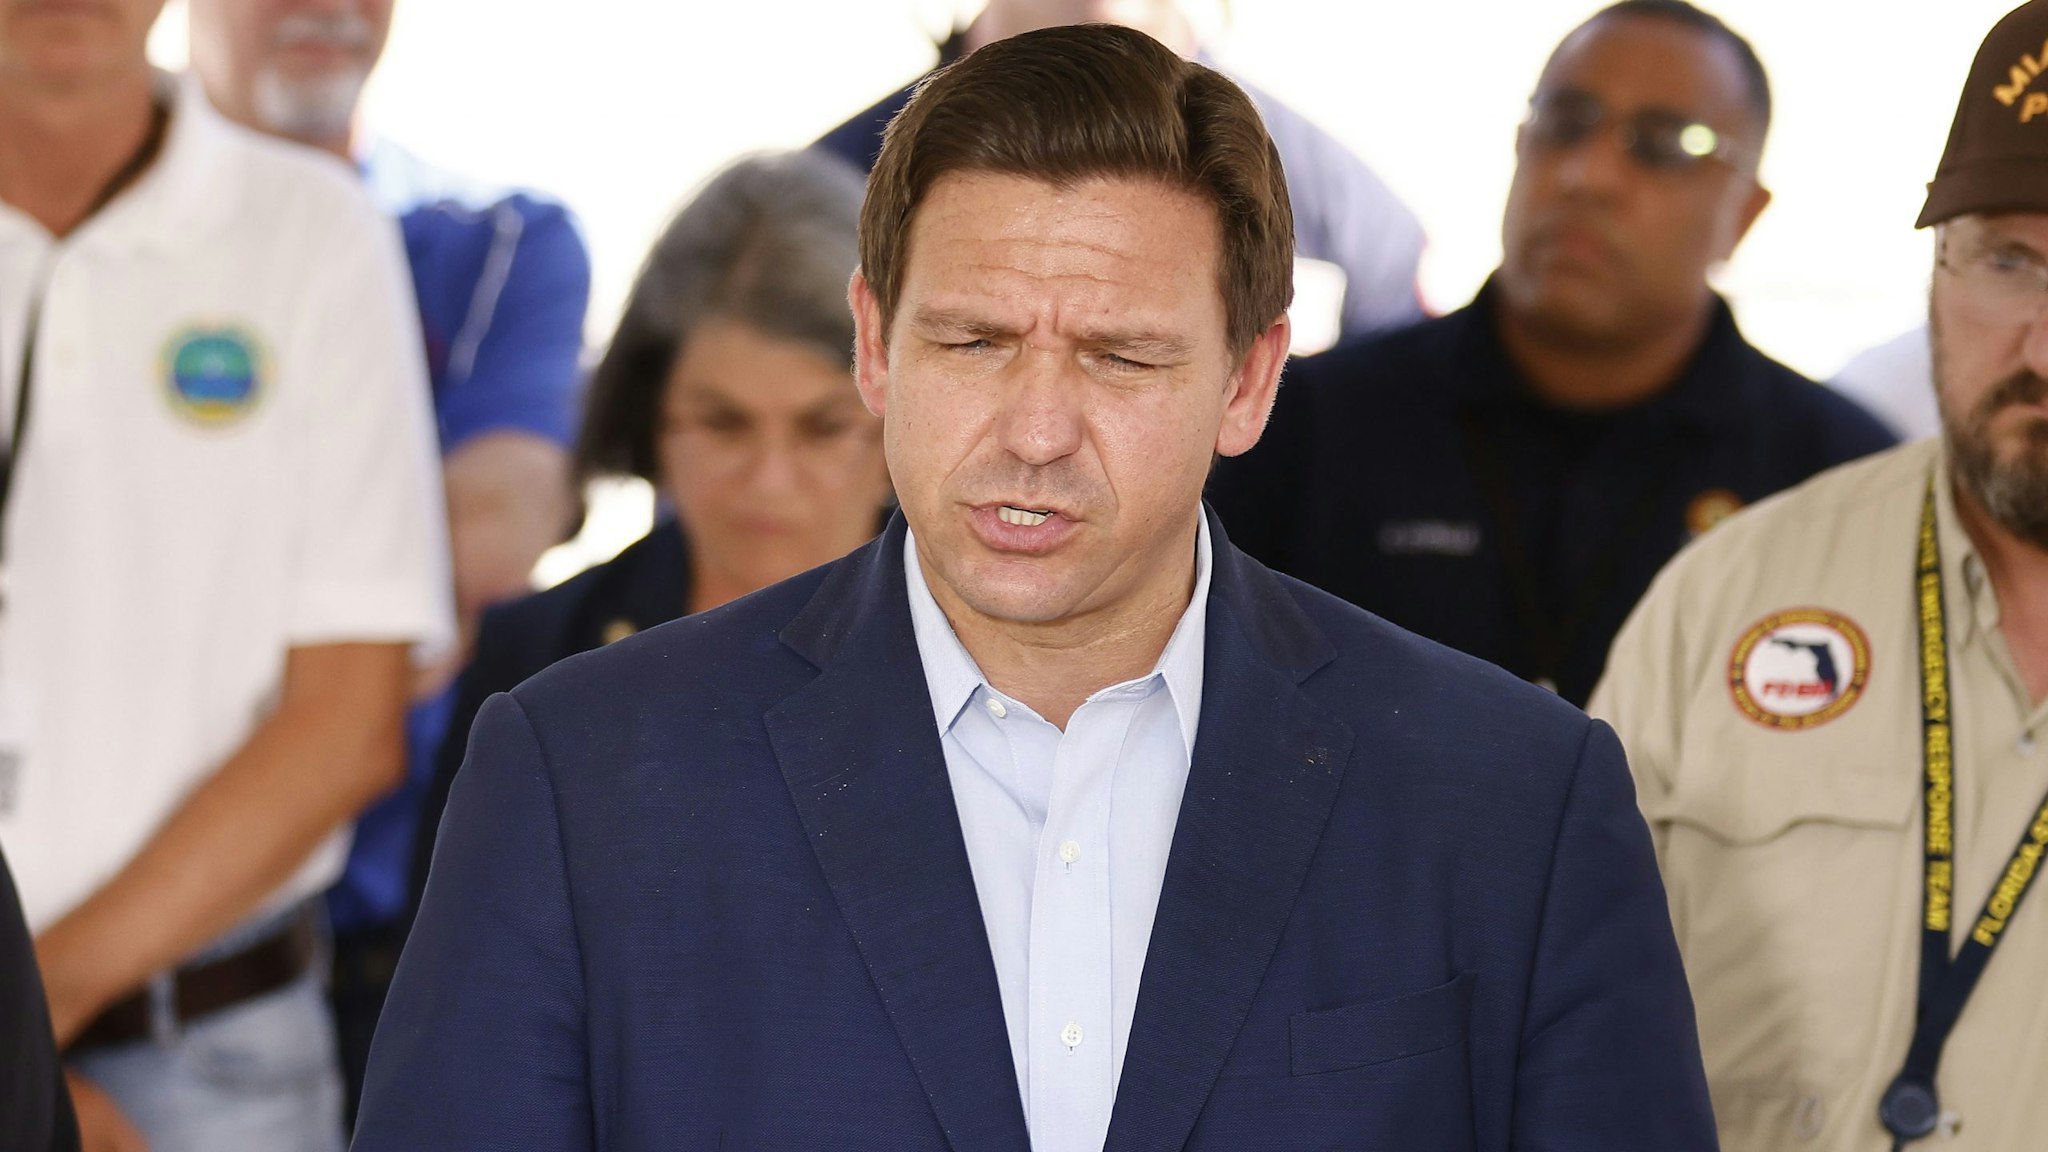 SURFSIDE, FLORIDA - JULY 03: Florida Gov. Ron DeSantis speaks to the media about the 12-story Champlain Towers South condo building that partially collapsed on July 03, 2021 in Surfside, Florida. Over one hundred people are being reported as missing as the search-and-rescue effort continues.